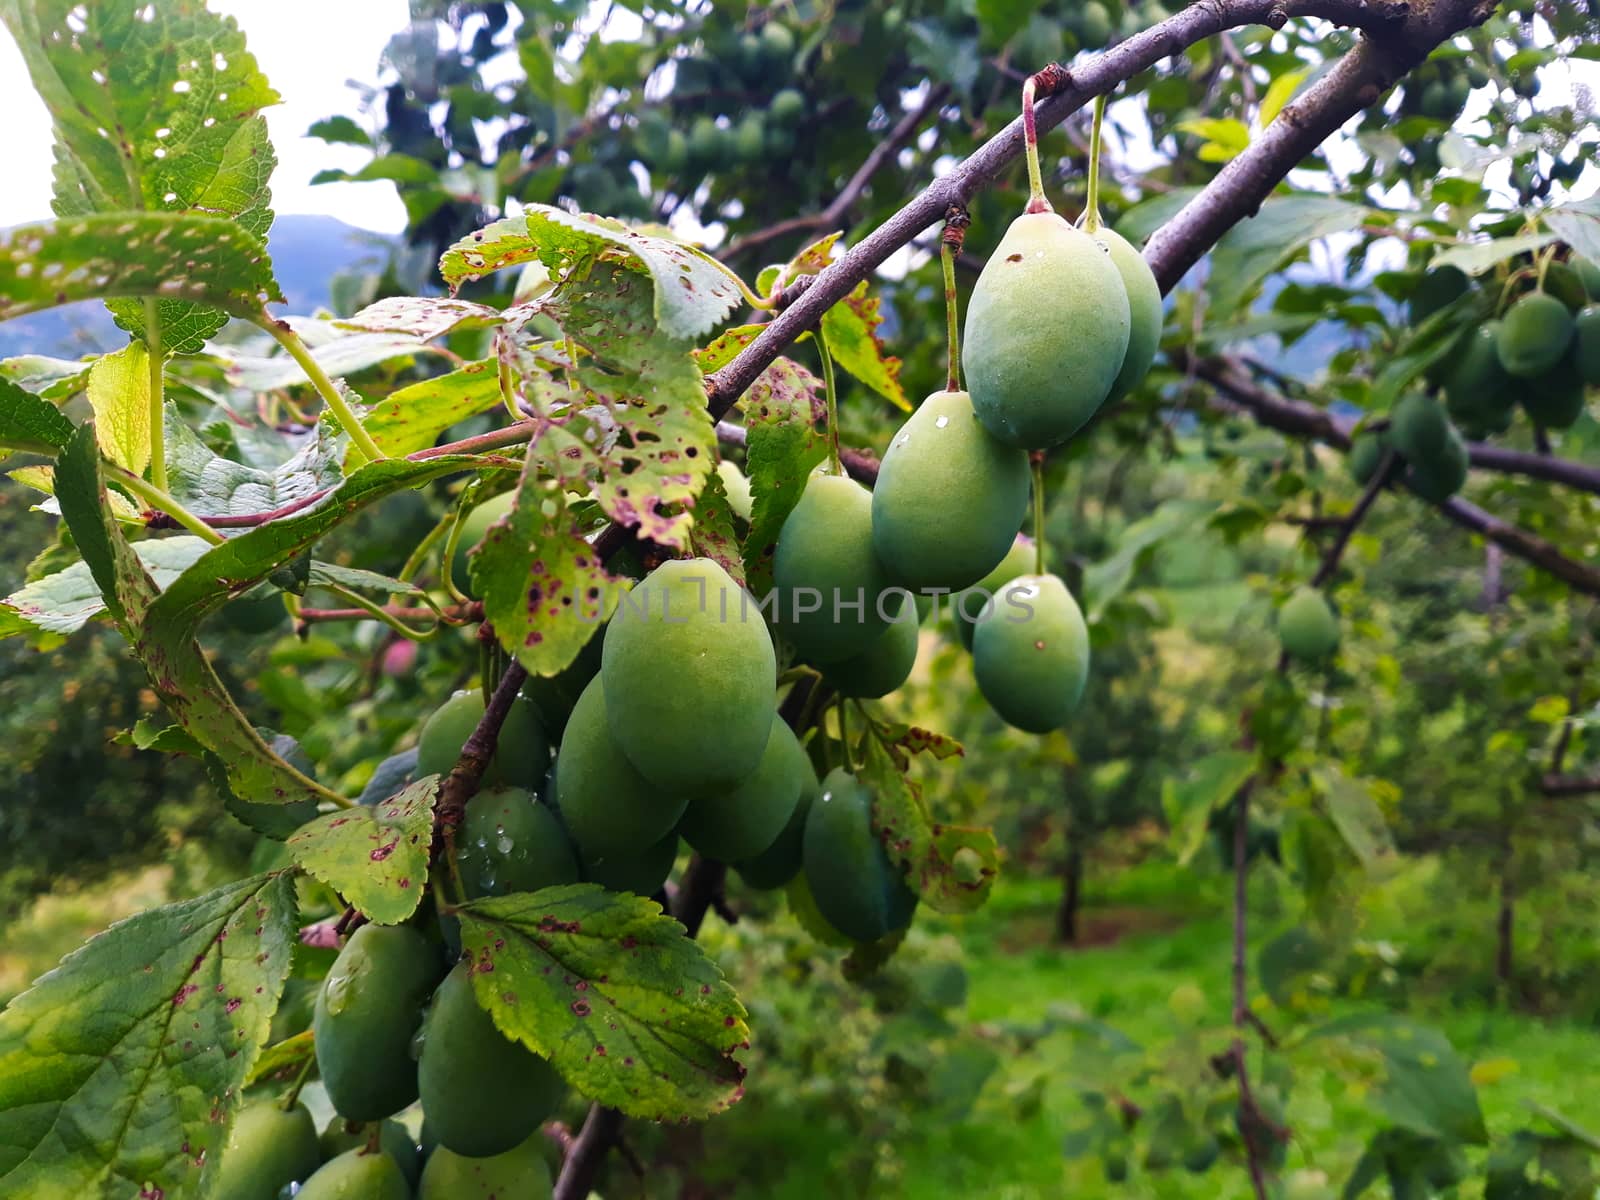 A group of green and unripe plums on a branch after rain. Zavidovici, Bosnia and Herzegovina.